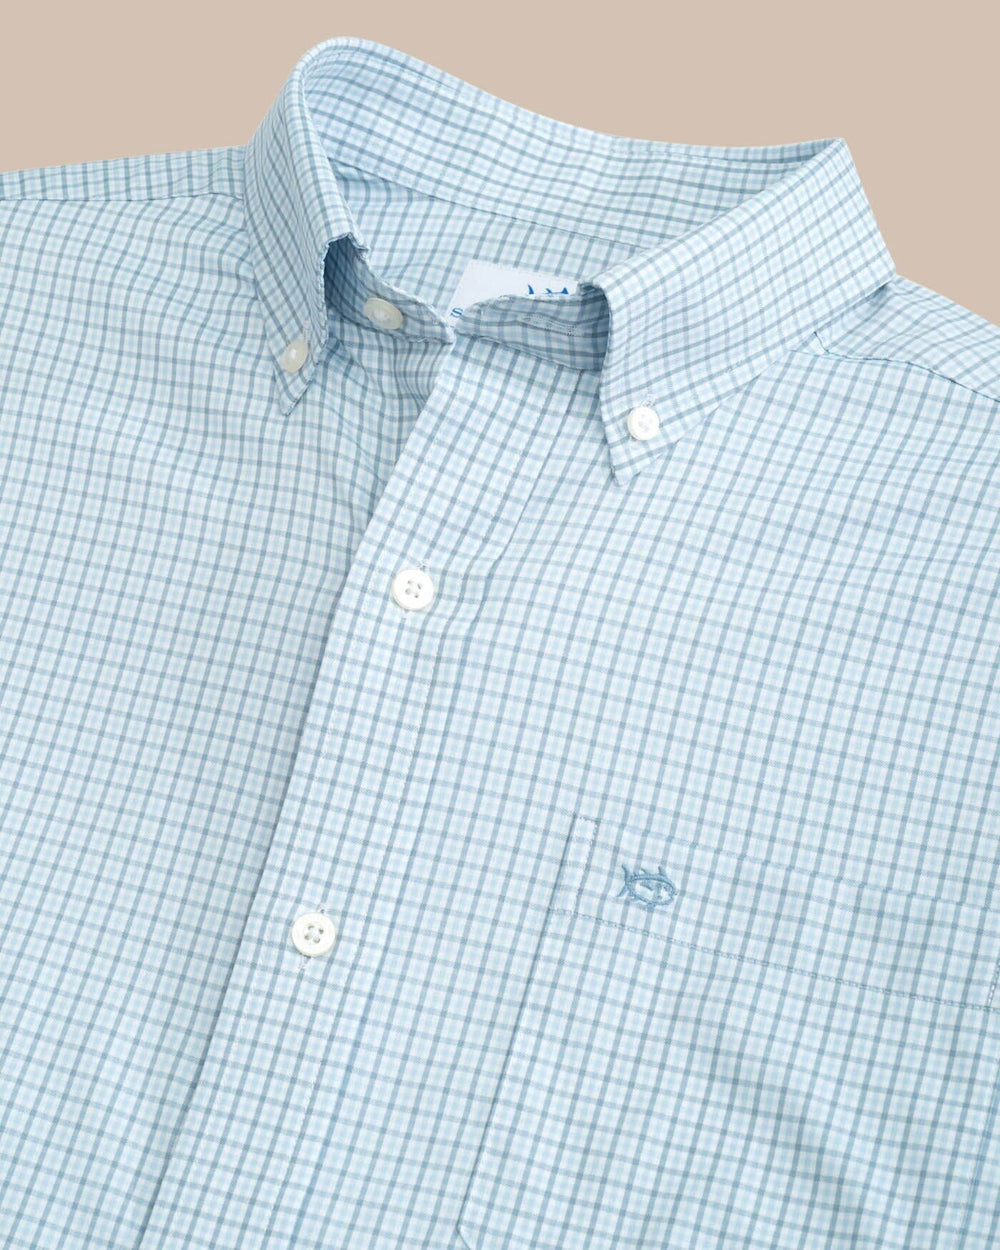 The detail view of the Southern Tide brrr Intercoastal McBee Check Long Sleeve Sportshirt by Southern Tide - Windward Blue